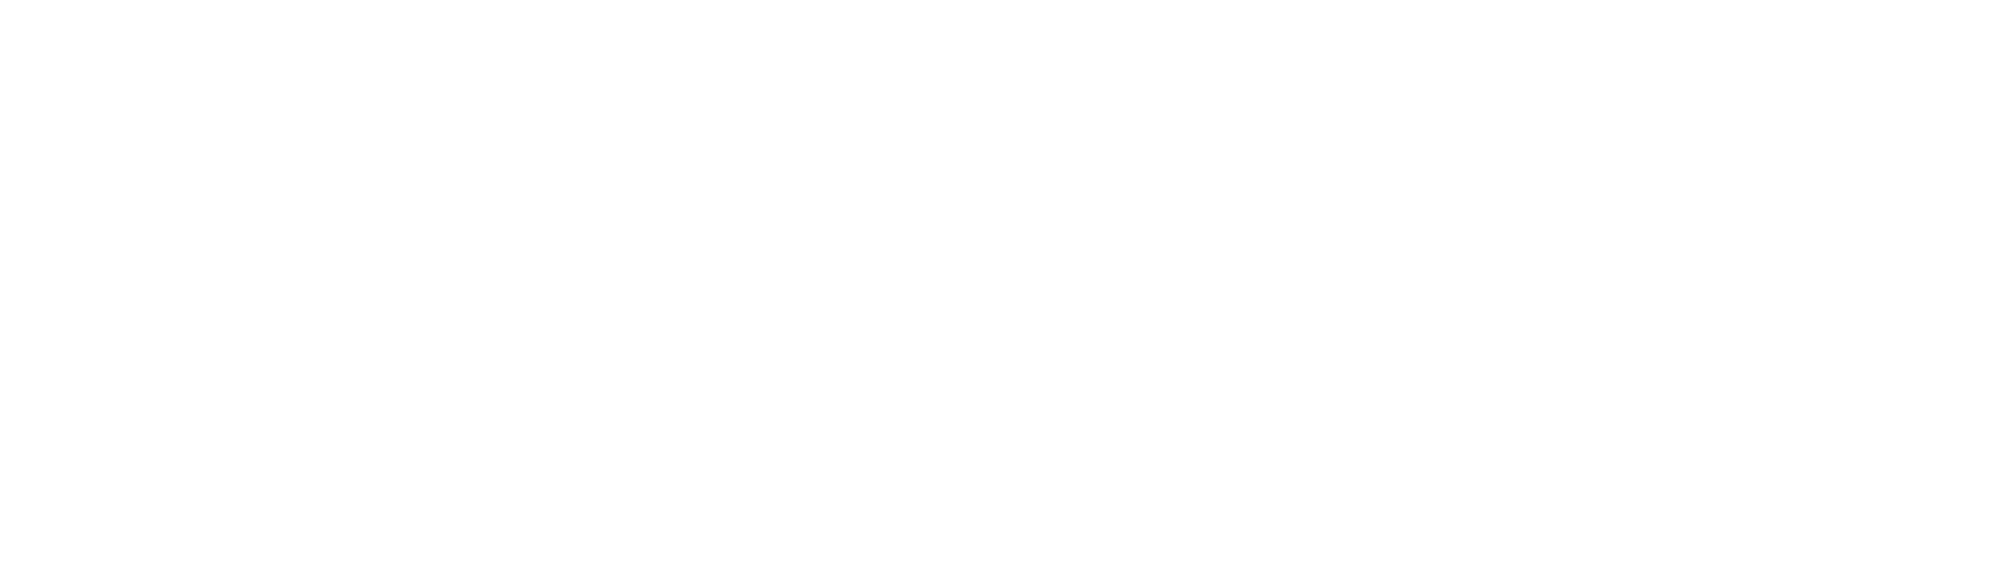 Northwood Technical College - Learning First